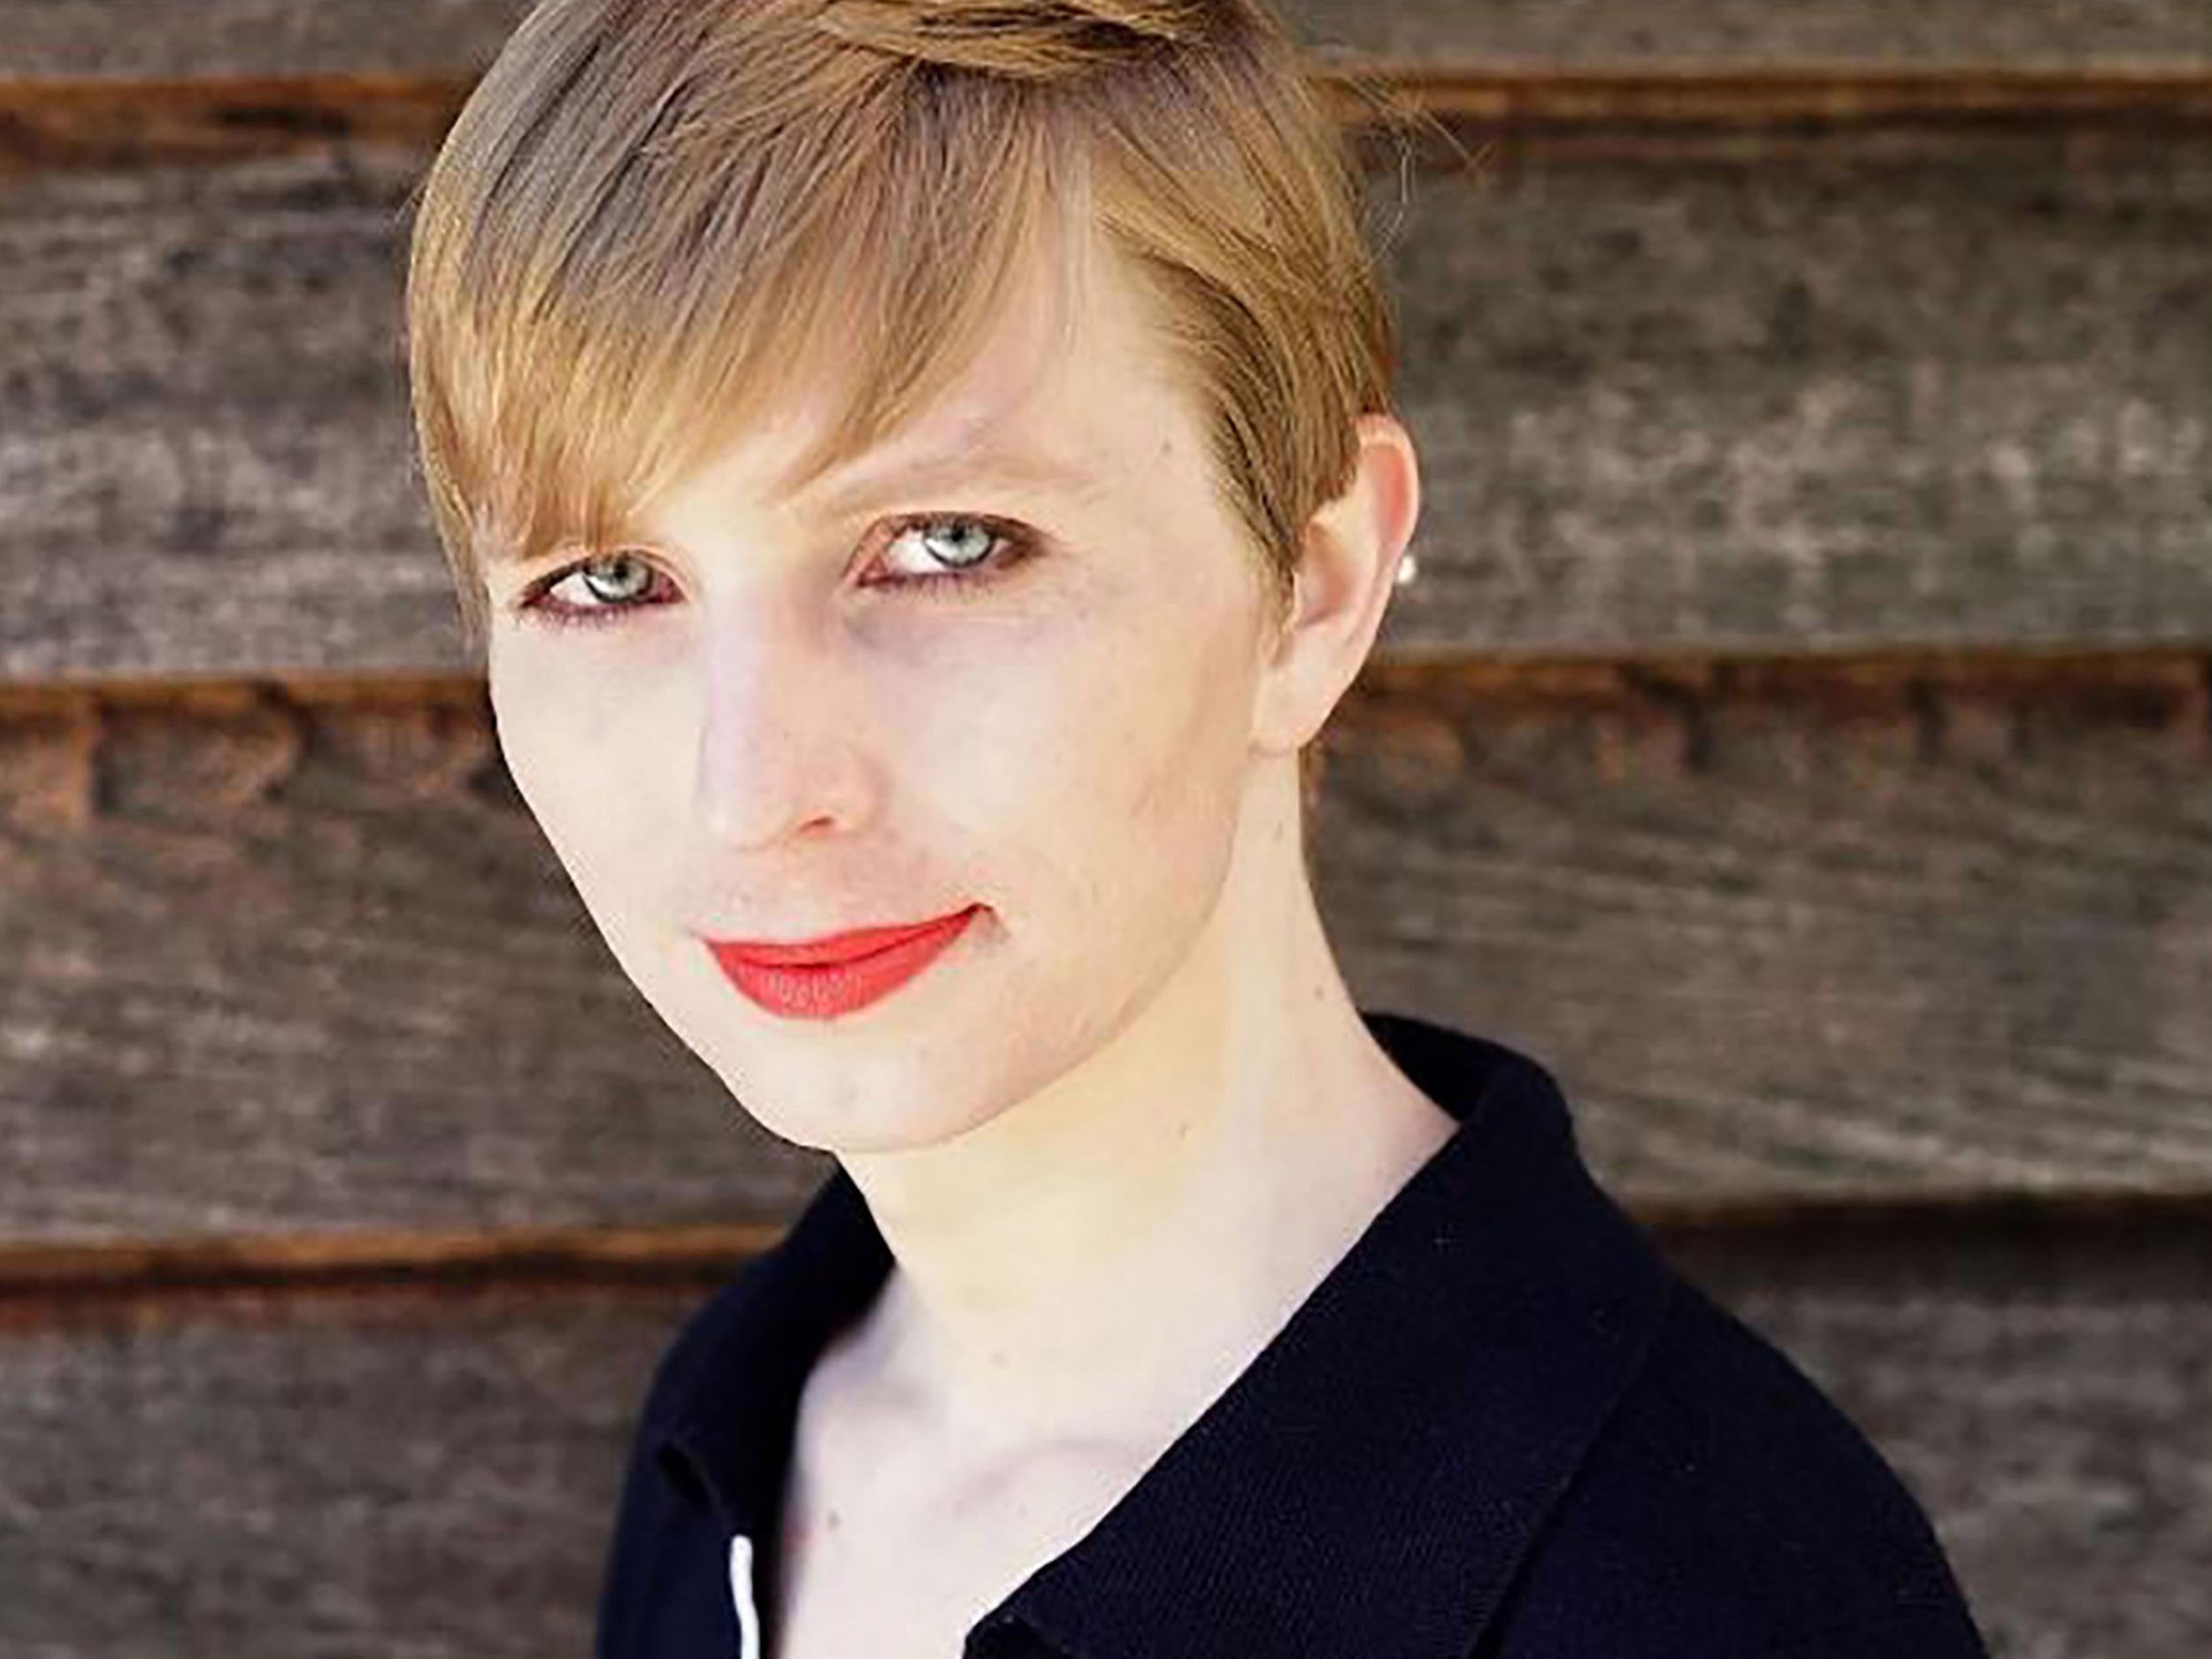 Former intelligence analyst Chelsea Manning took aim at the Trump administration, hinting towards the military's disregard for civilian casualties in her Veteran's Day message.